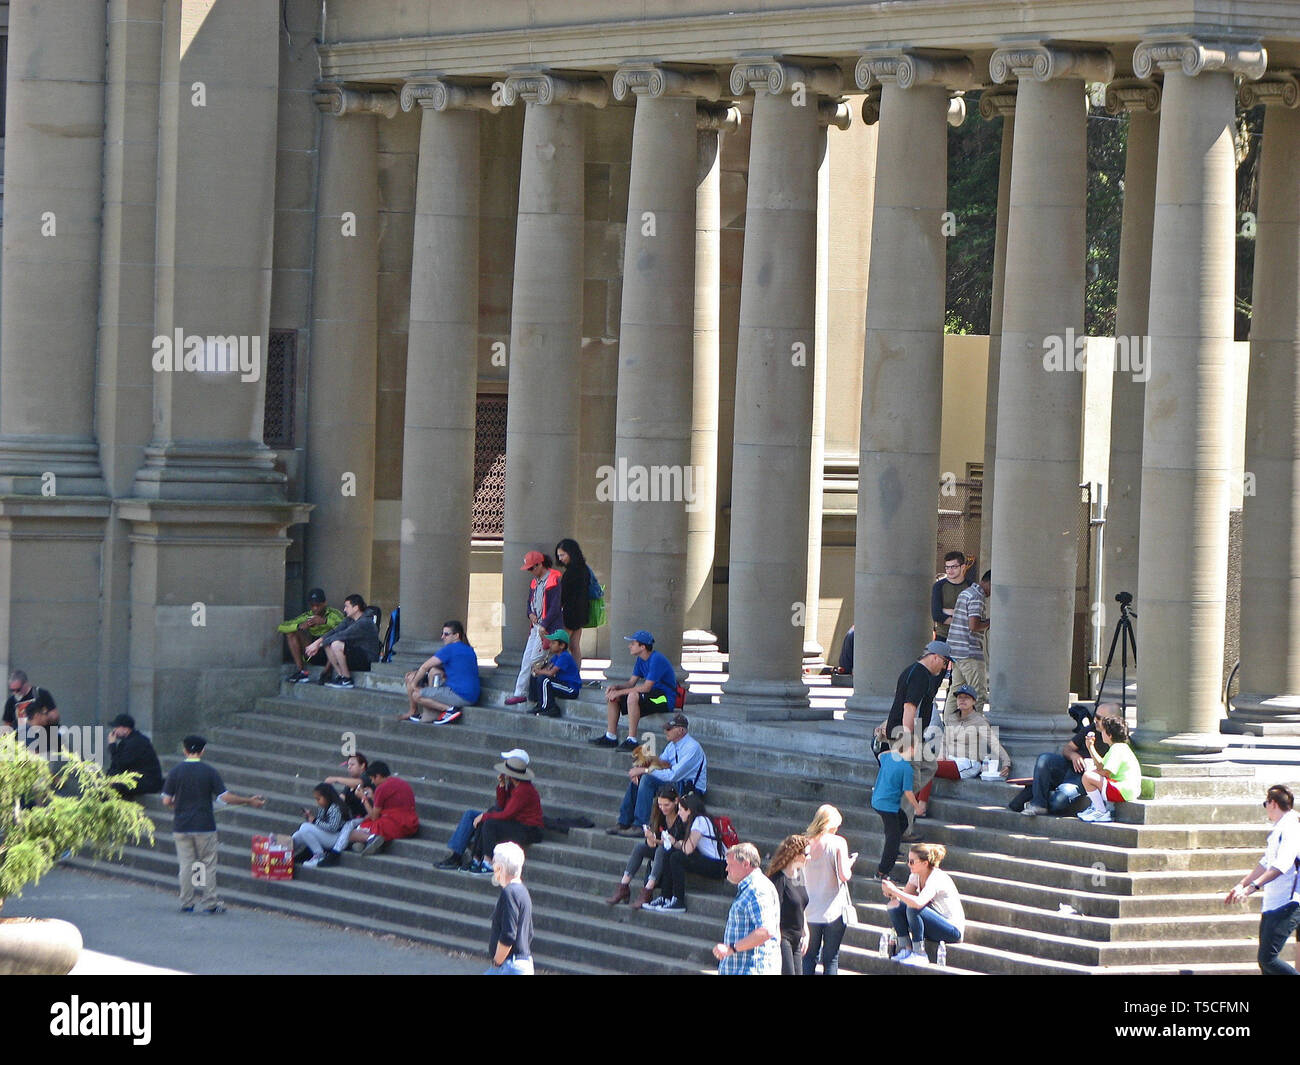 A crowd of people sit on the steps of a building in San Francisco. Stock Photo